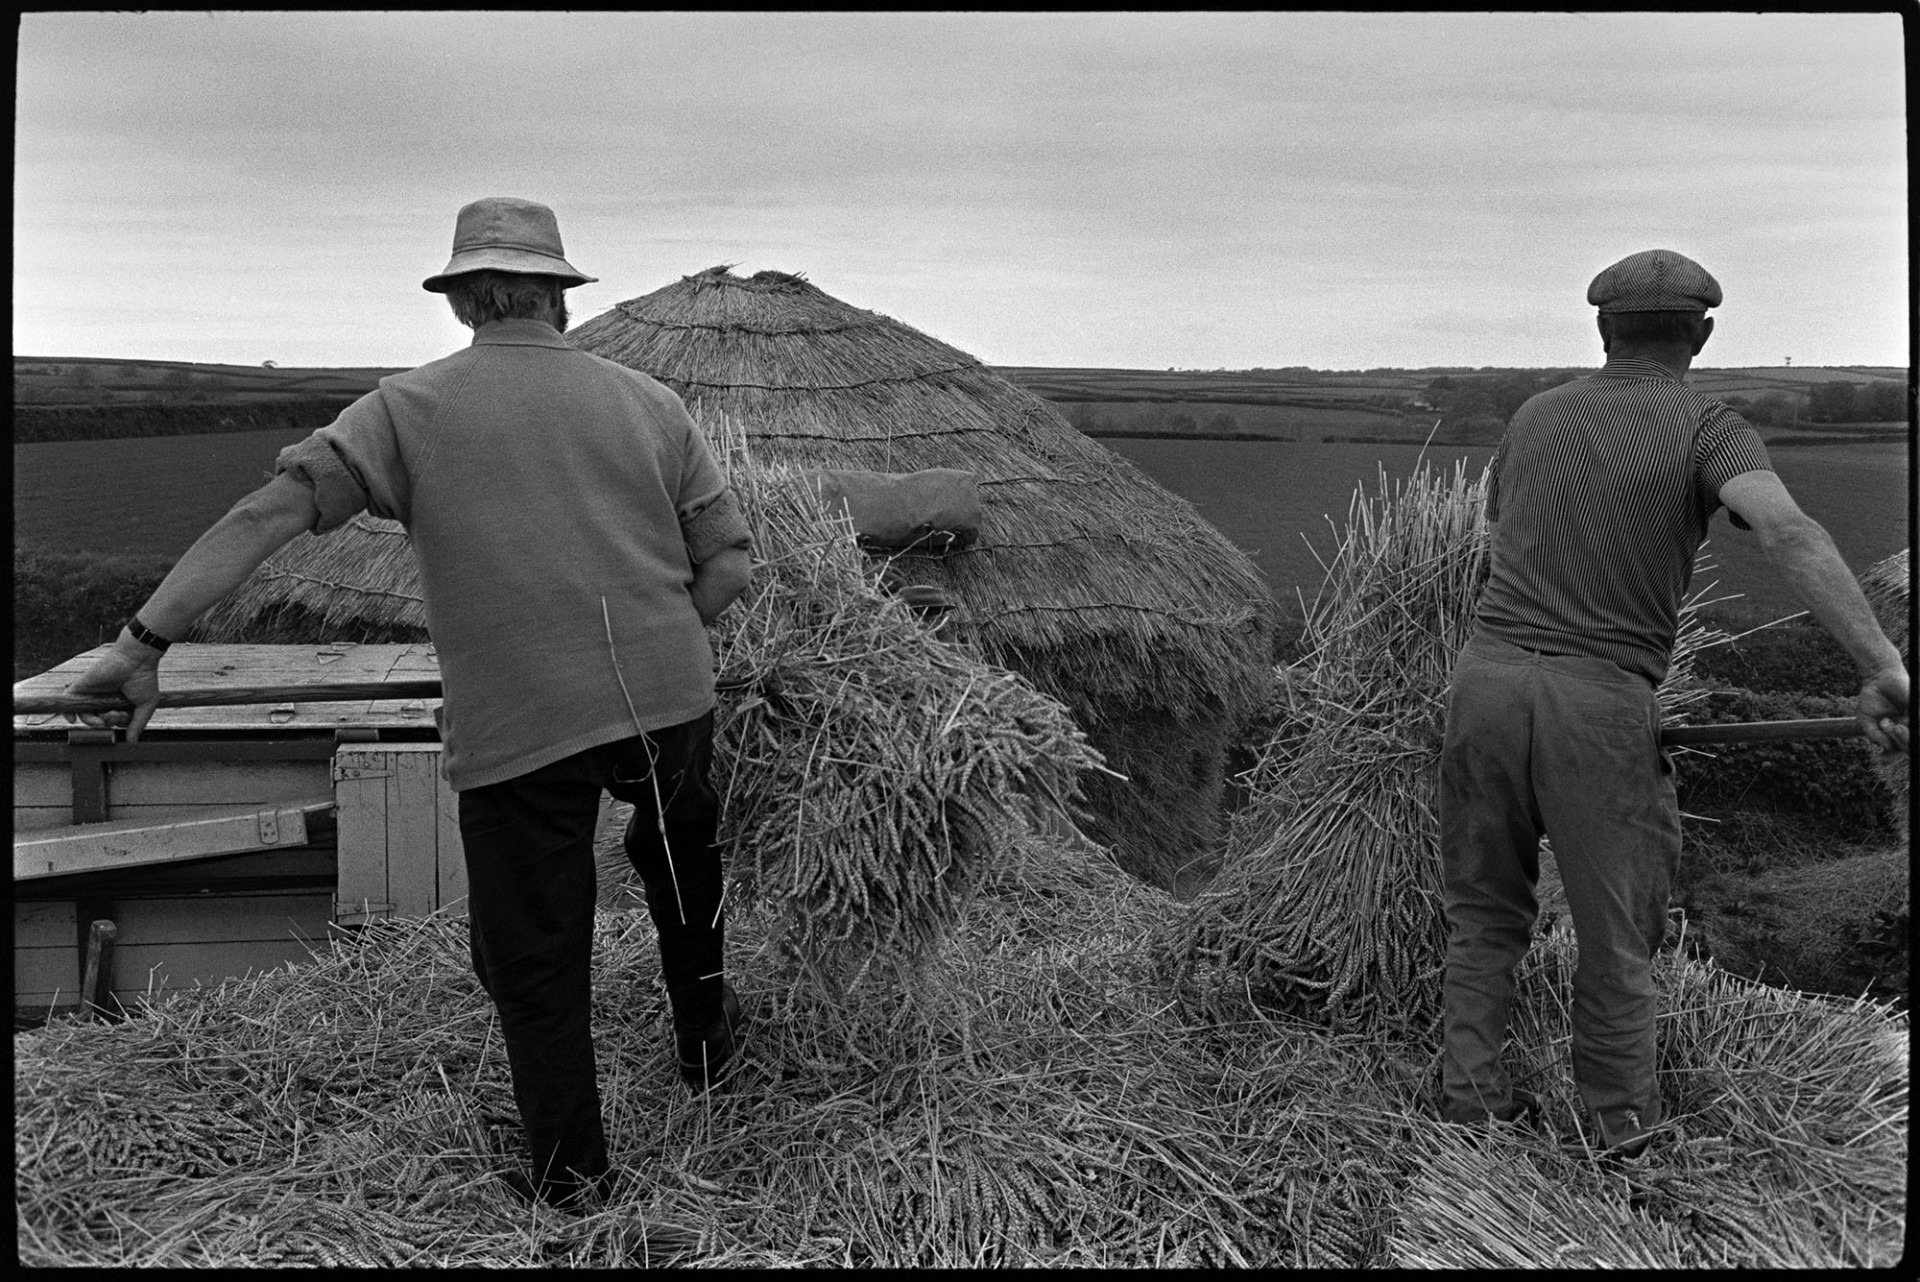 Reed combing, men working, ricks, tractors, etc. <br />
[Two men dismantling a wheat rick. They are stood on top of the rick with bundles of reed on pitchforks which they are passing to men on the reed comber. The top of a reed comber can be seen and another thatched wheat rick is in the background.]